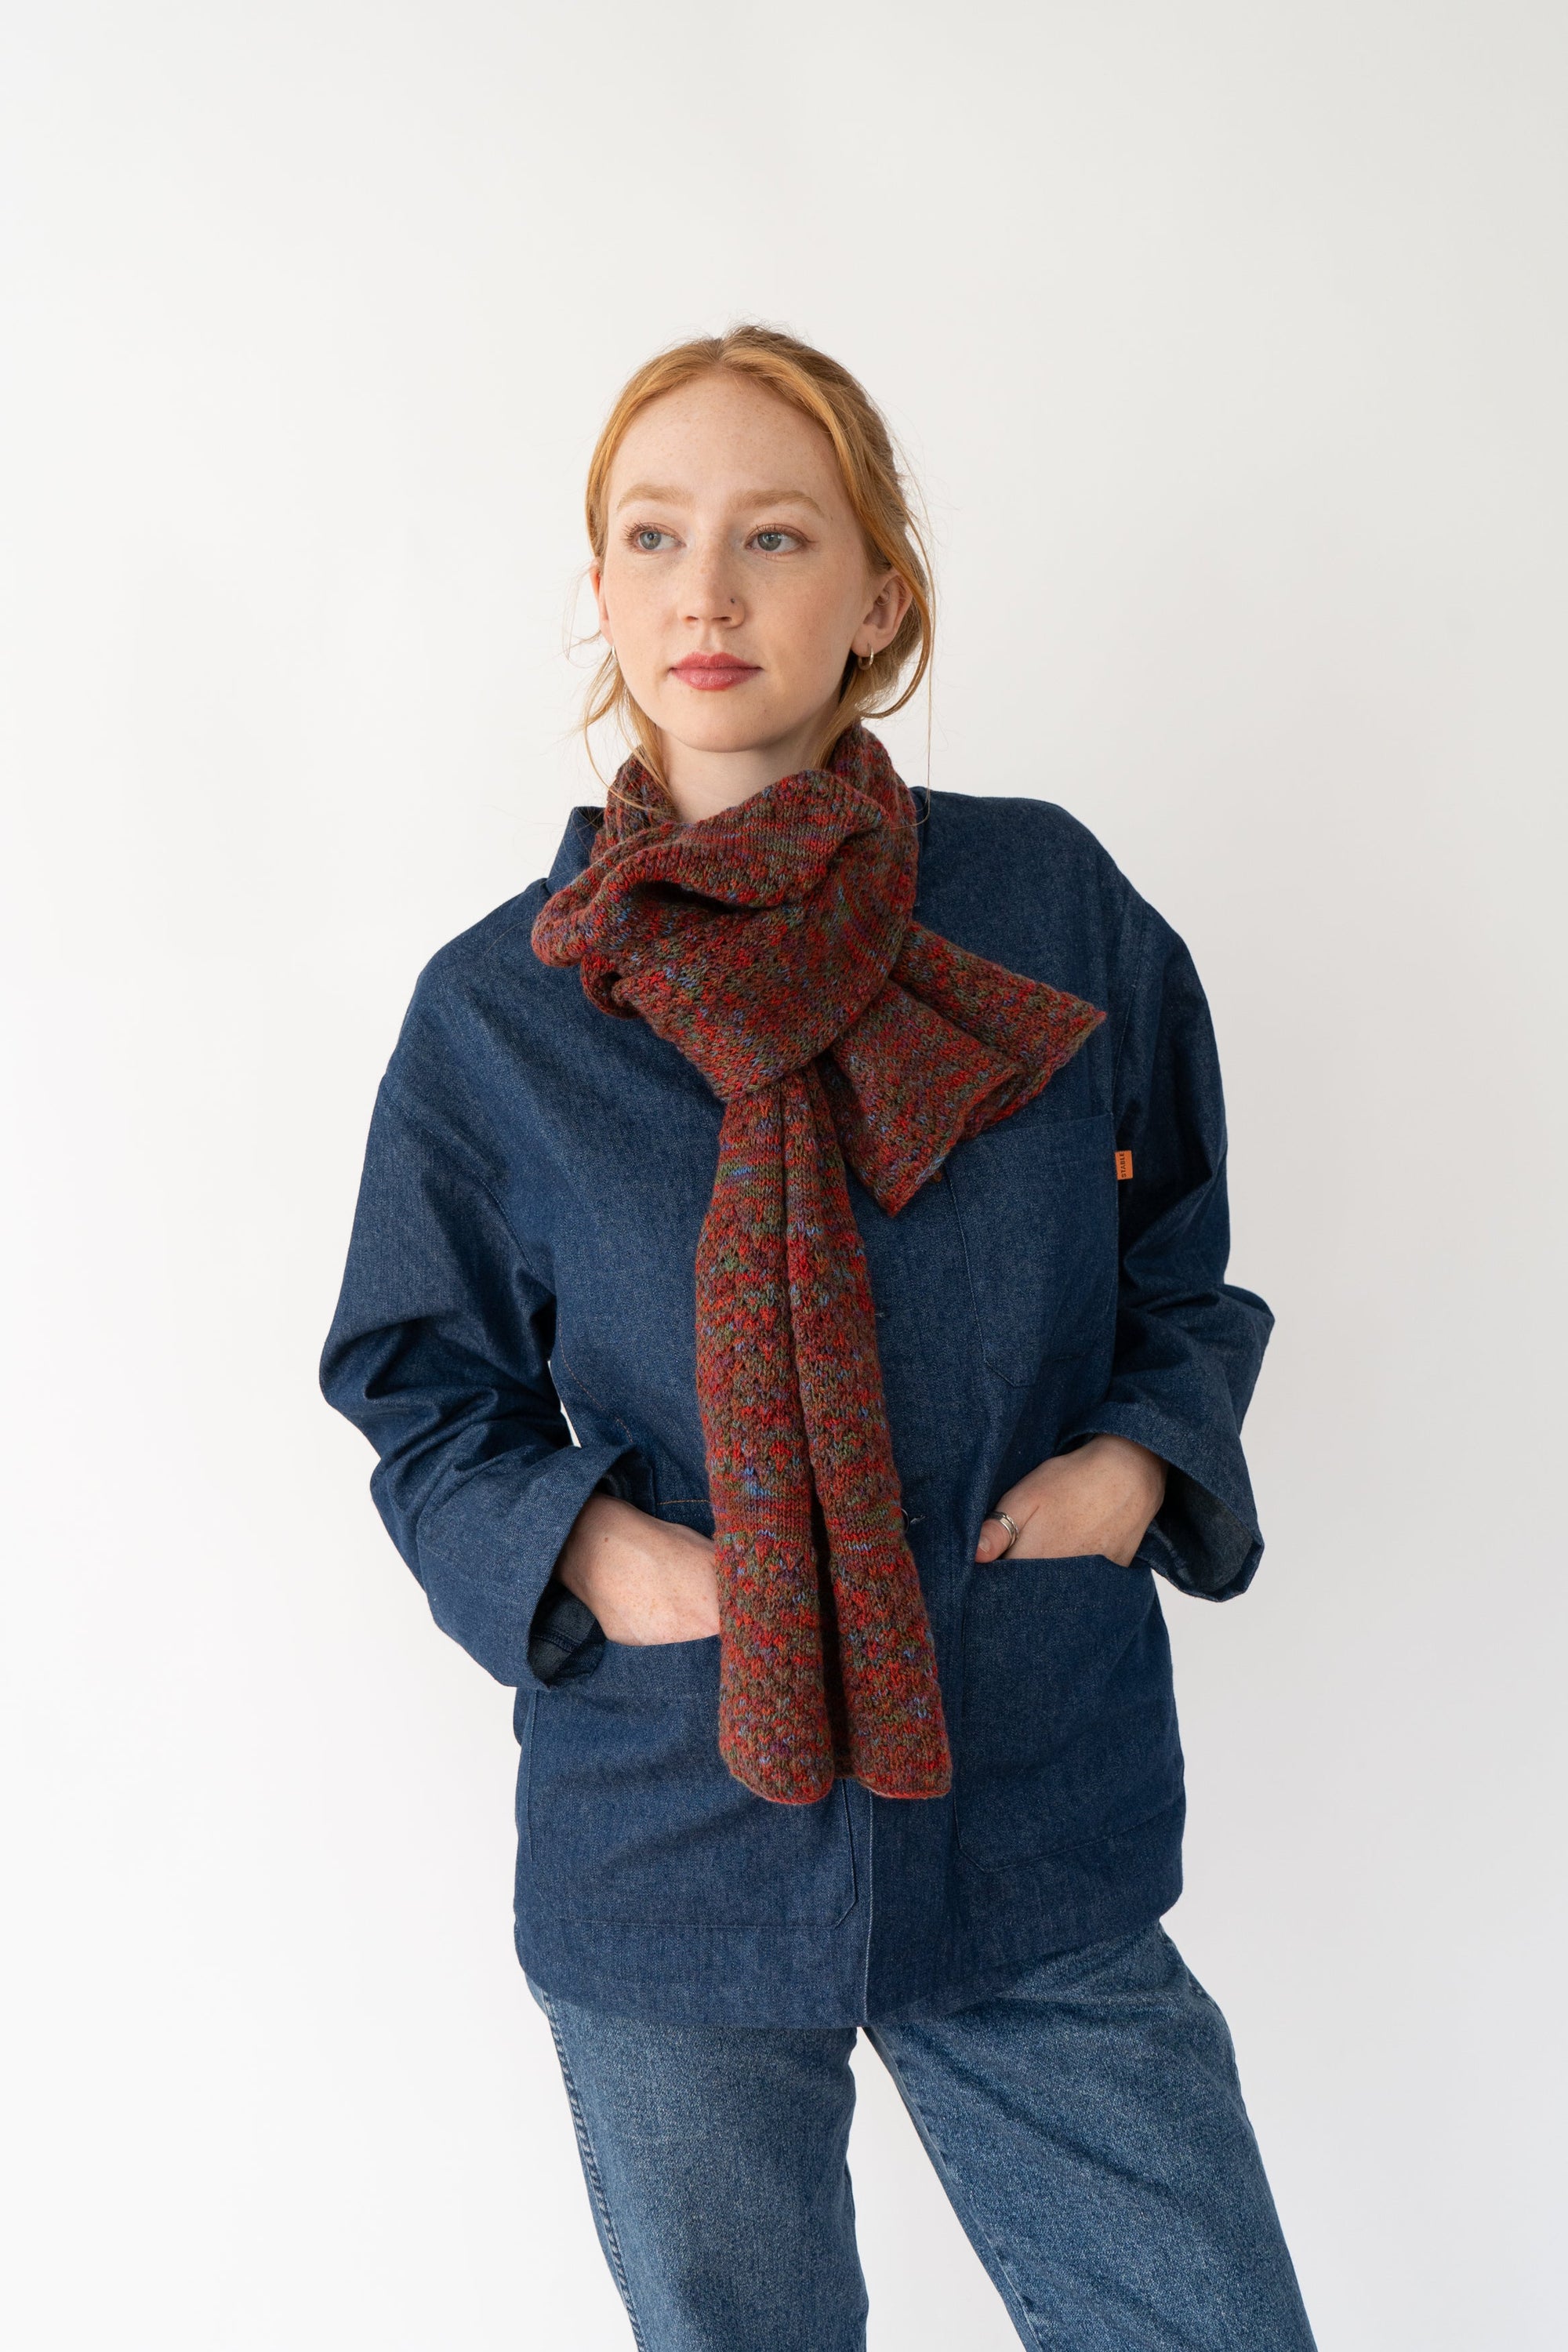 Rust Small Merino Scarf-Scarves & Shawls-STABLE of Ireland